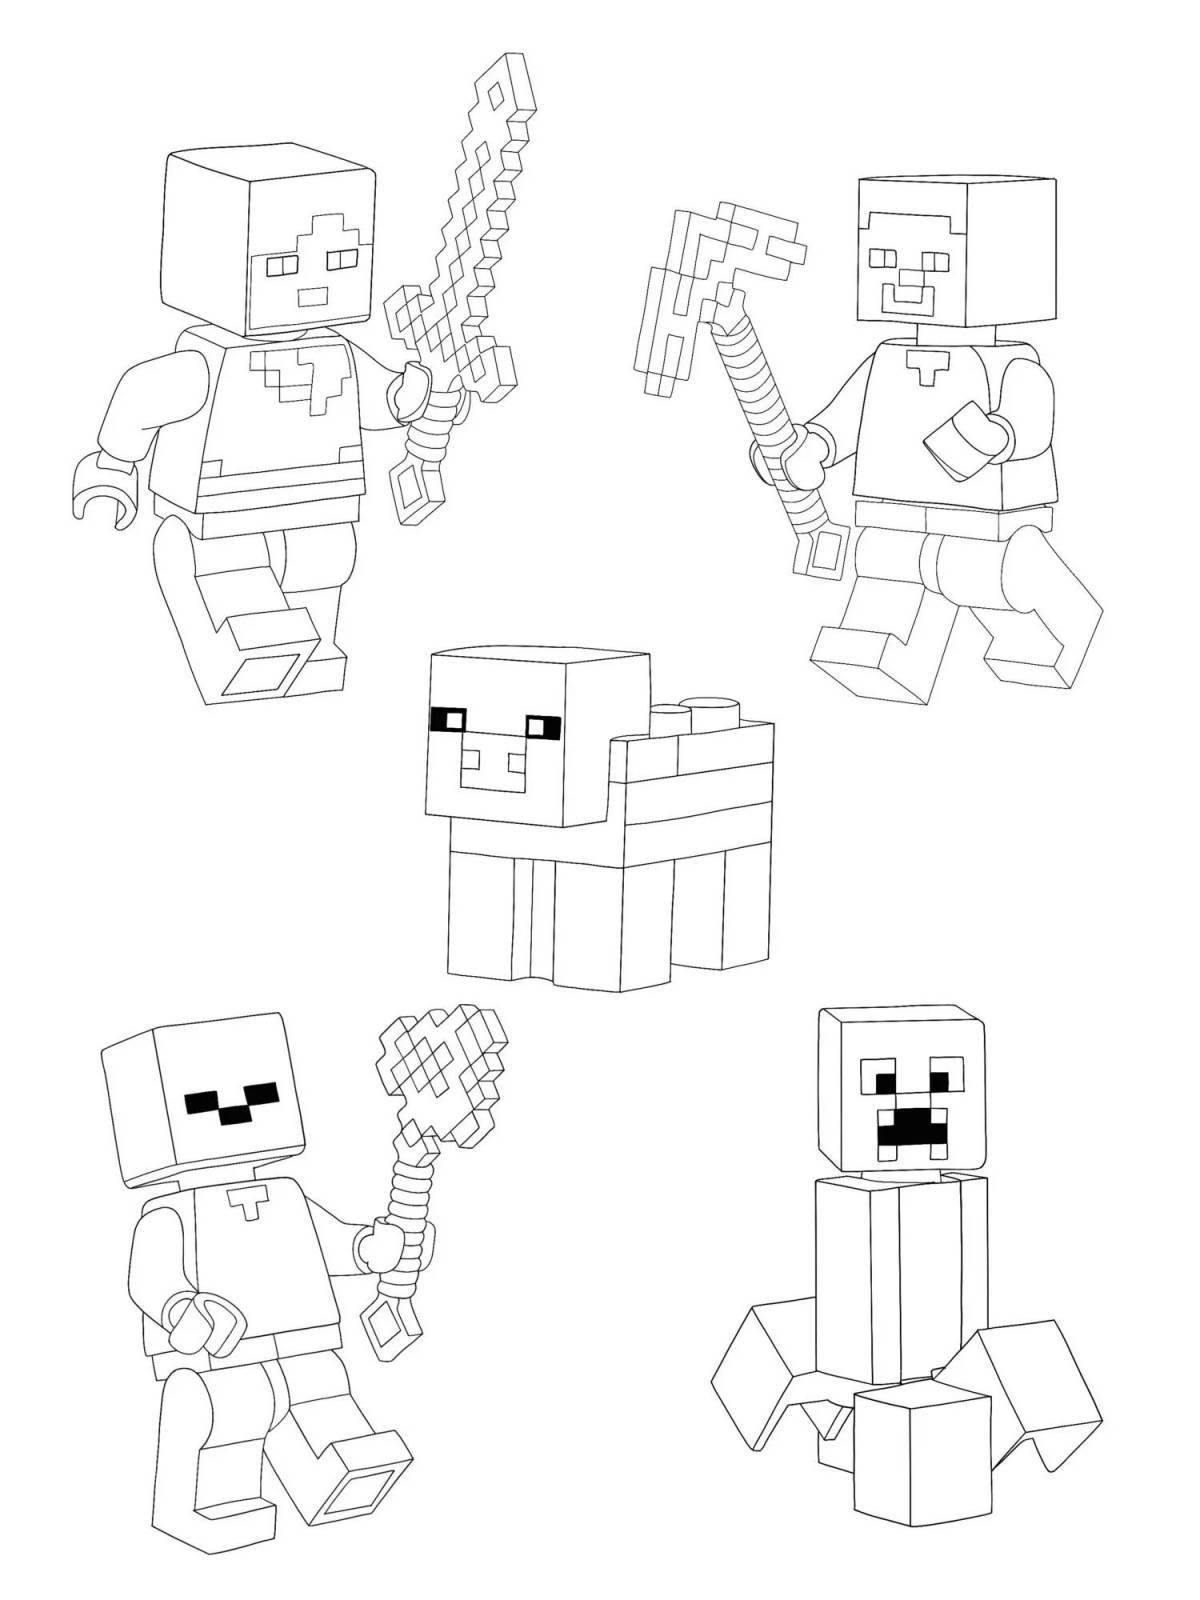 Awesome minecraft robot coloring page